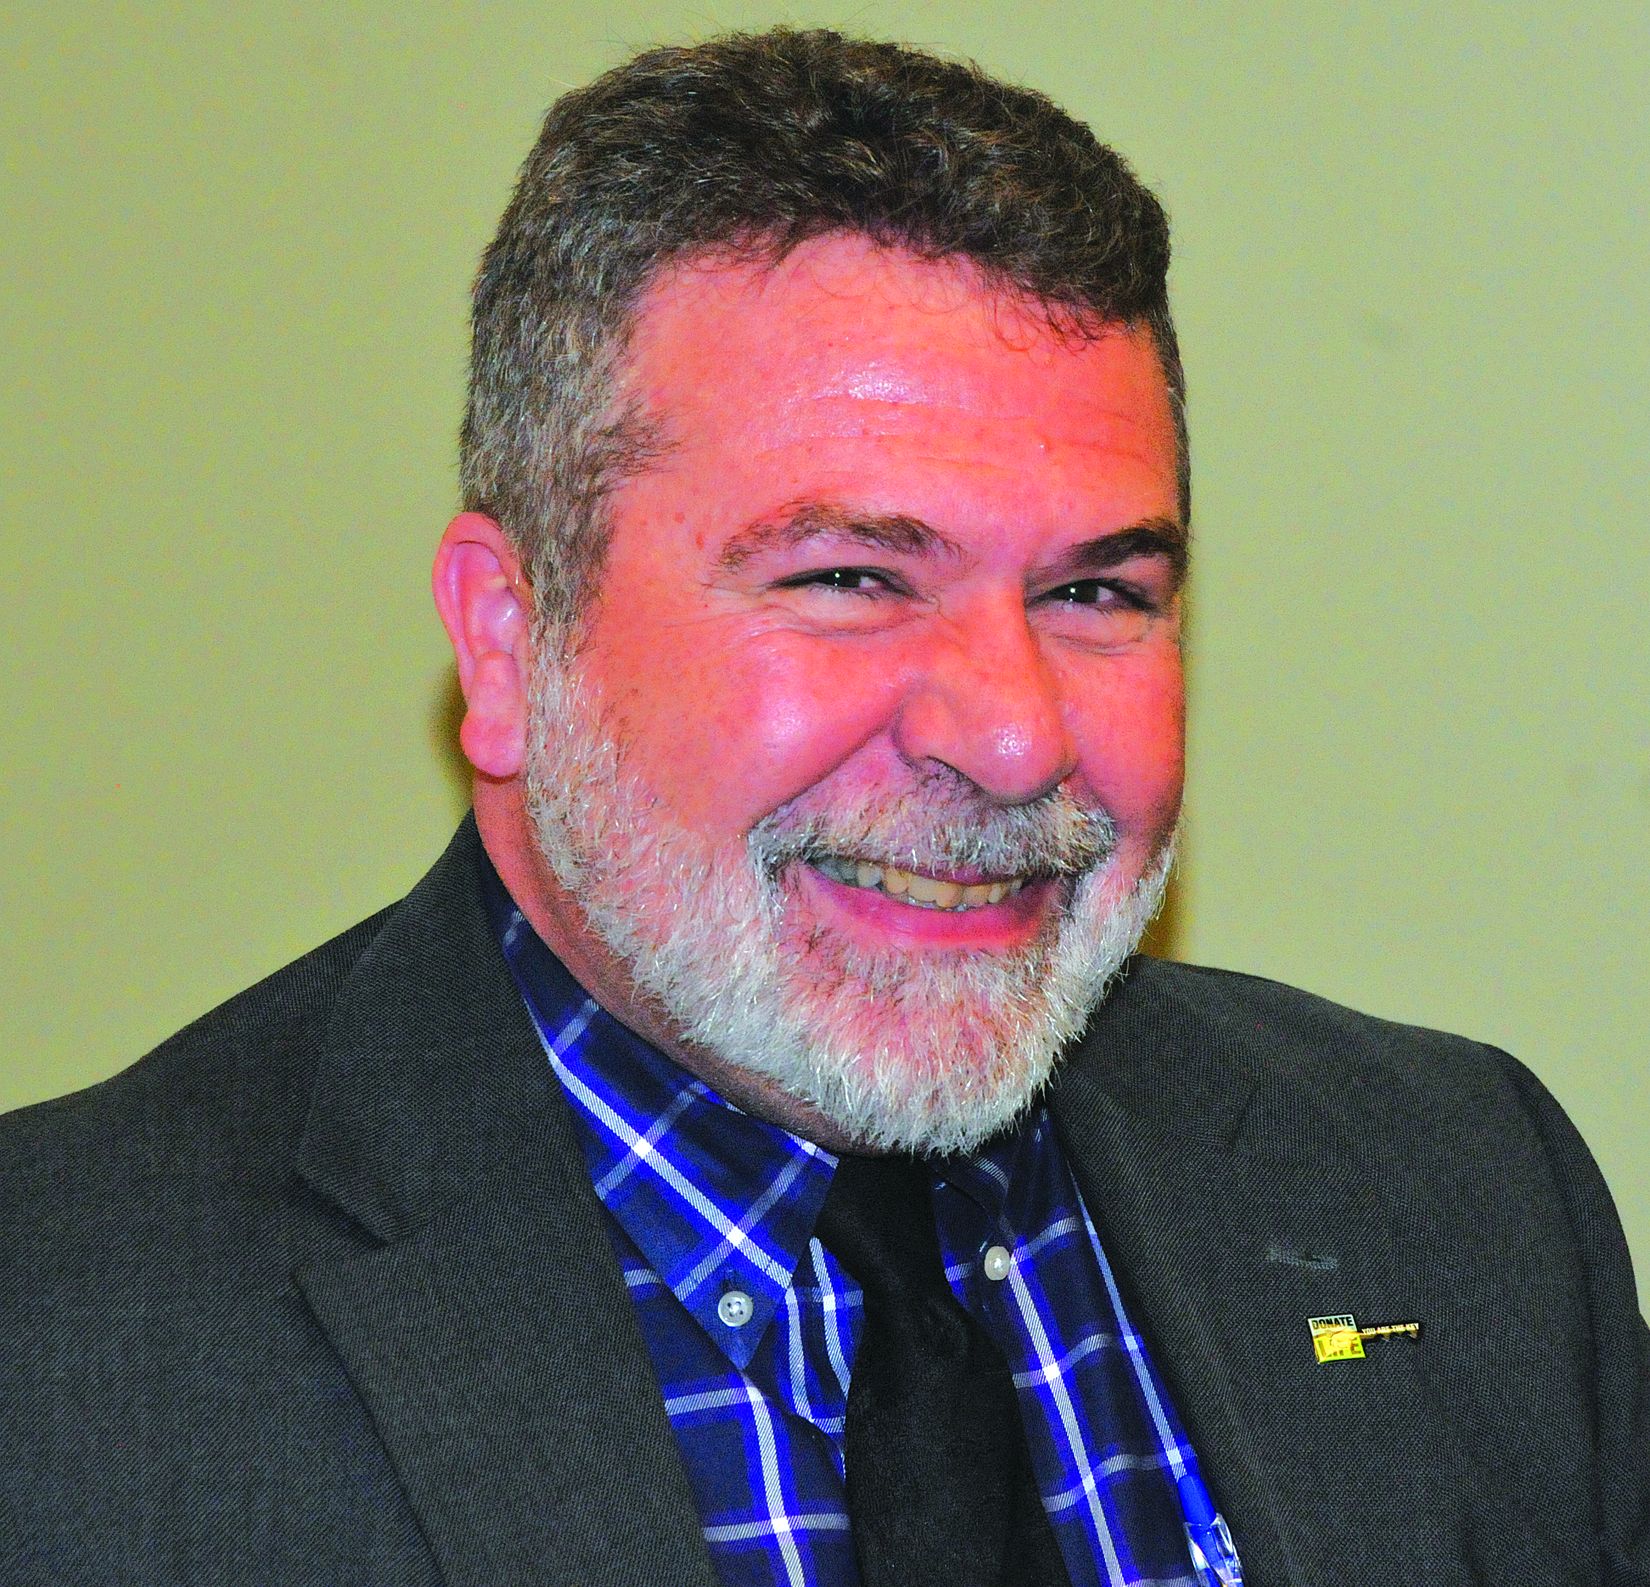 Mayor Larry Caza has high hopes for Schoharie